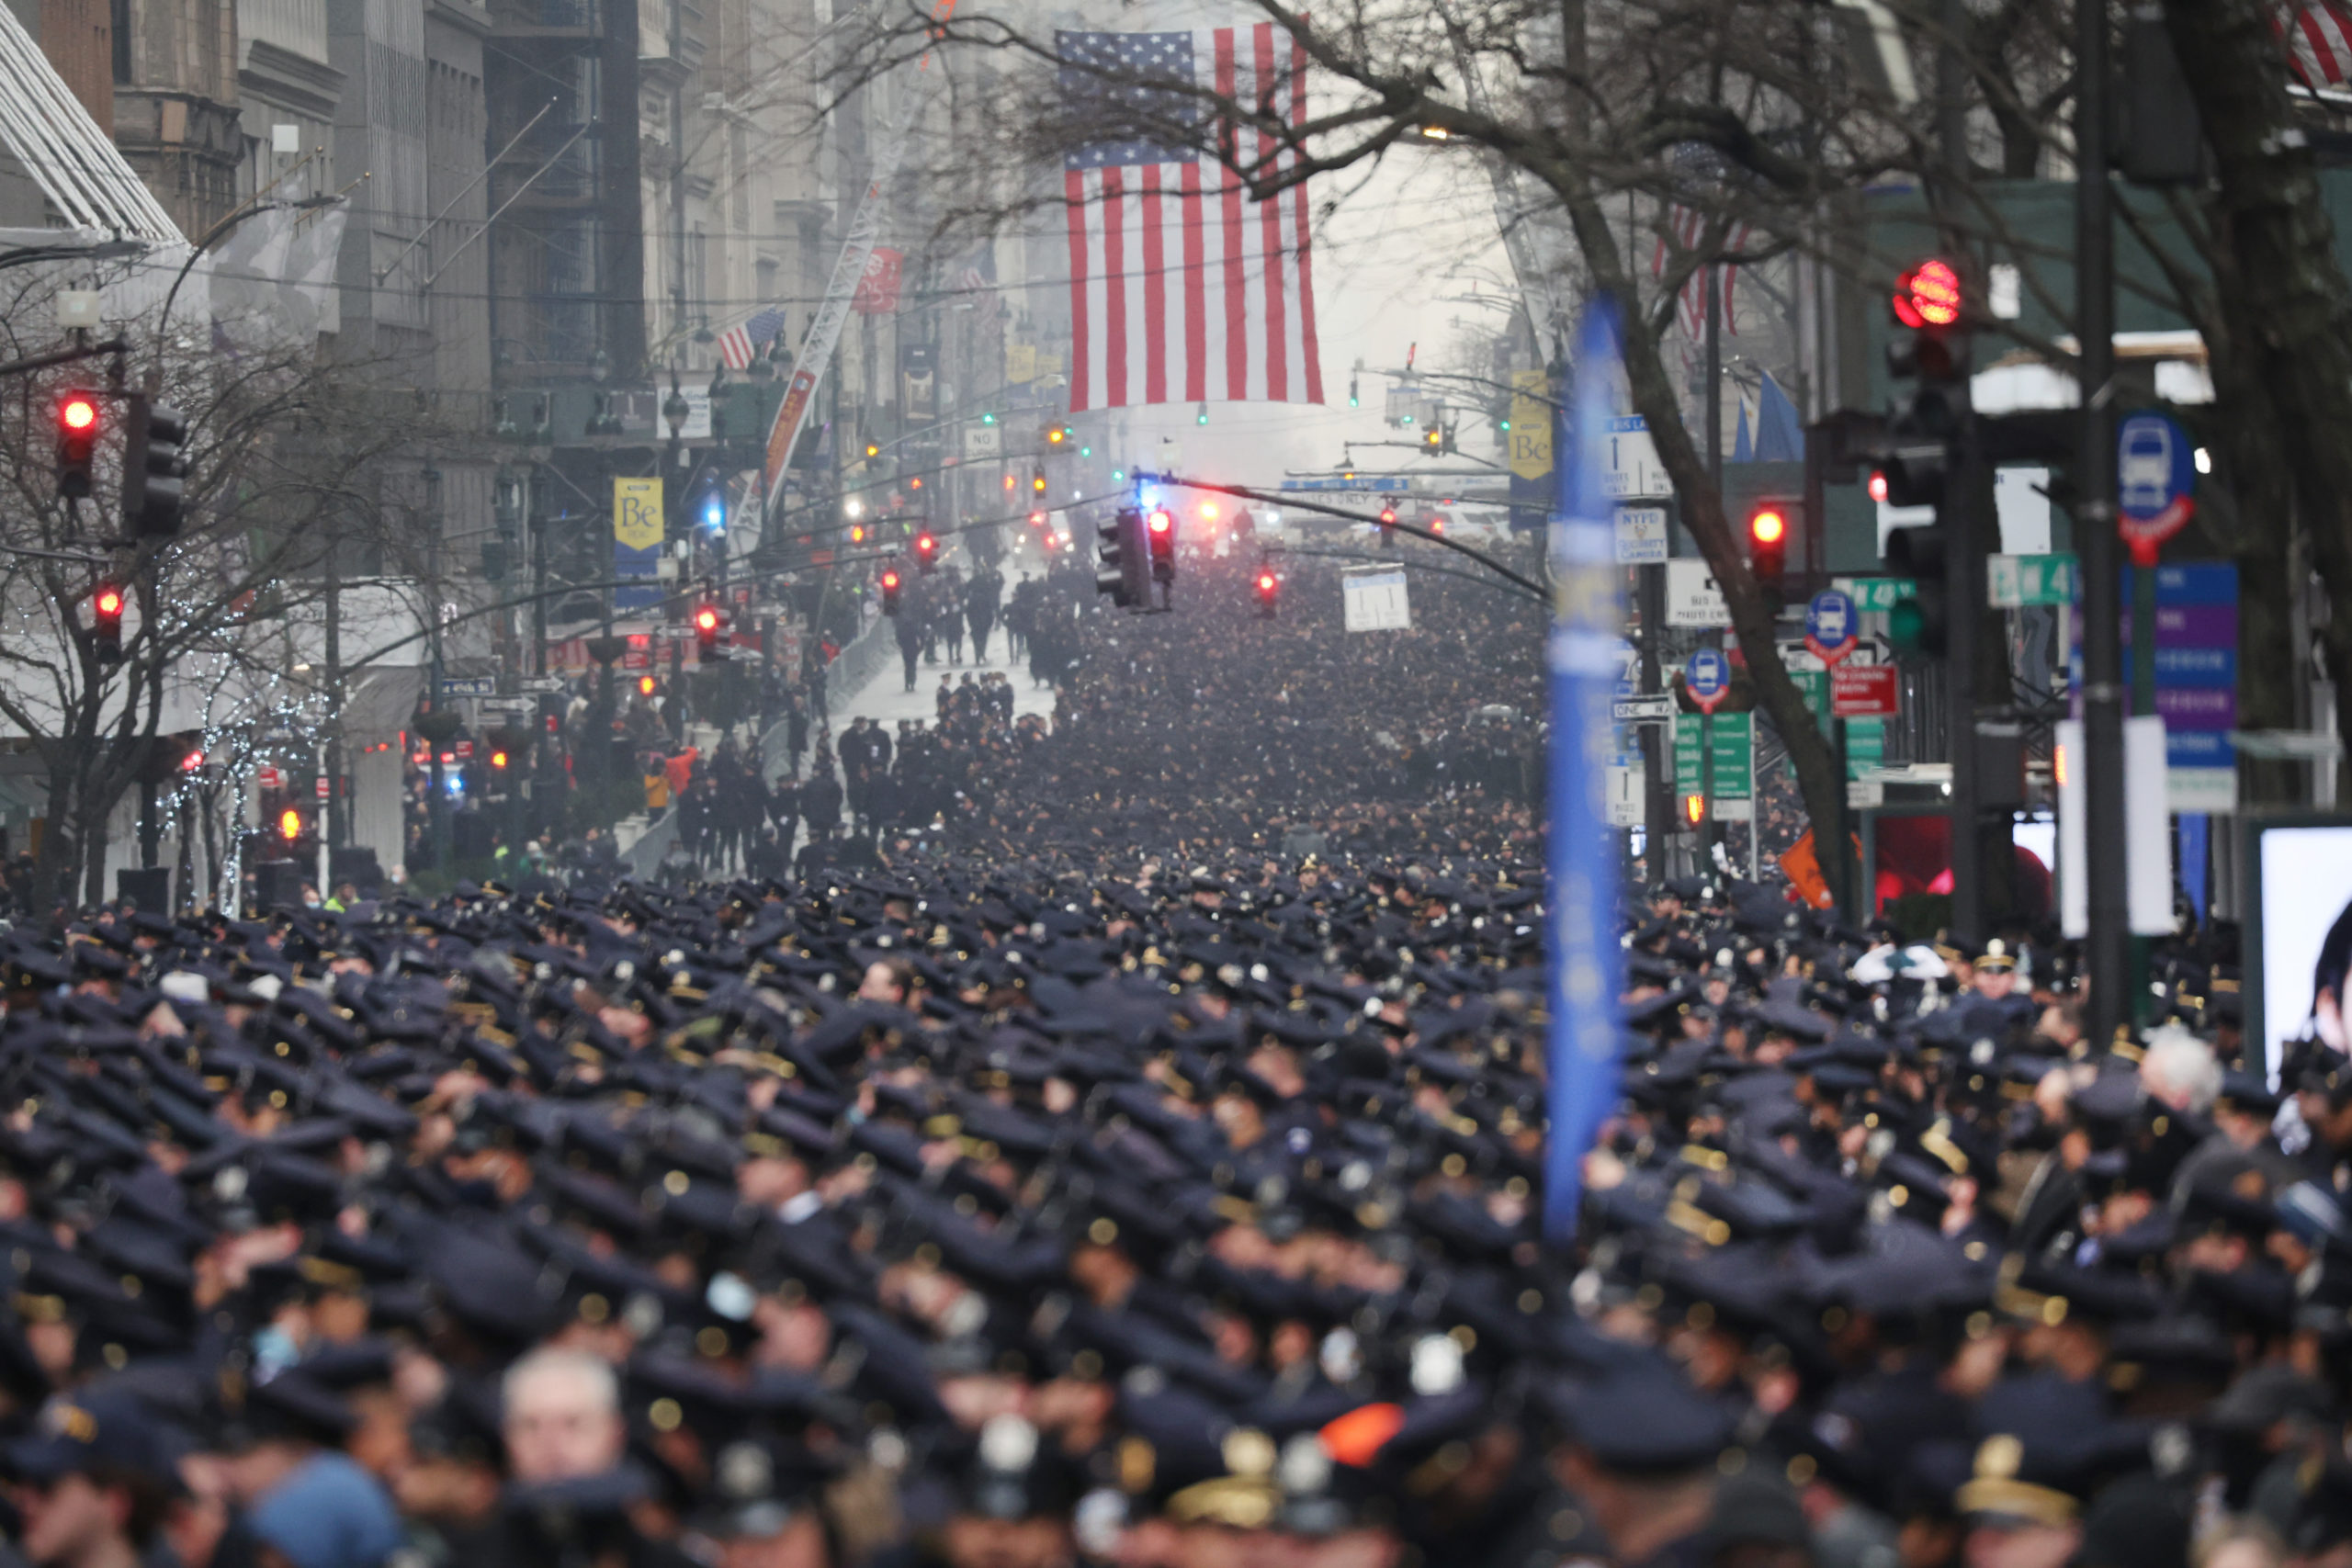 NEW YORK, NEW YORK - JANUARY 28: Thousands of police officers from around the country gather at St. Patrick's Cathedral to attend the funeral for fallen NYPD Officer Jason Rivera on January 28, 2022 in New York City. The 22-year-old NYPD officer was shot and killed on January 21 in Harlem while responding to a domestic disturbance call. Rivera's partner, Officer Wilbert Mora, also died from injuries suffered in the shooting. (Photo by Spencer Platt/Getty Images)